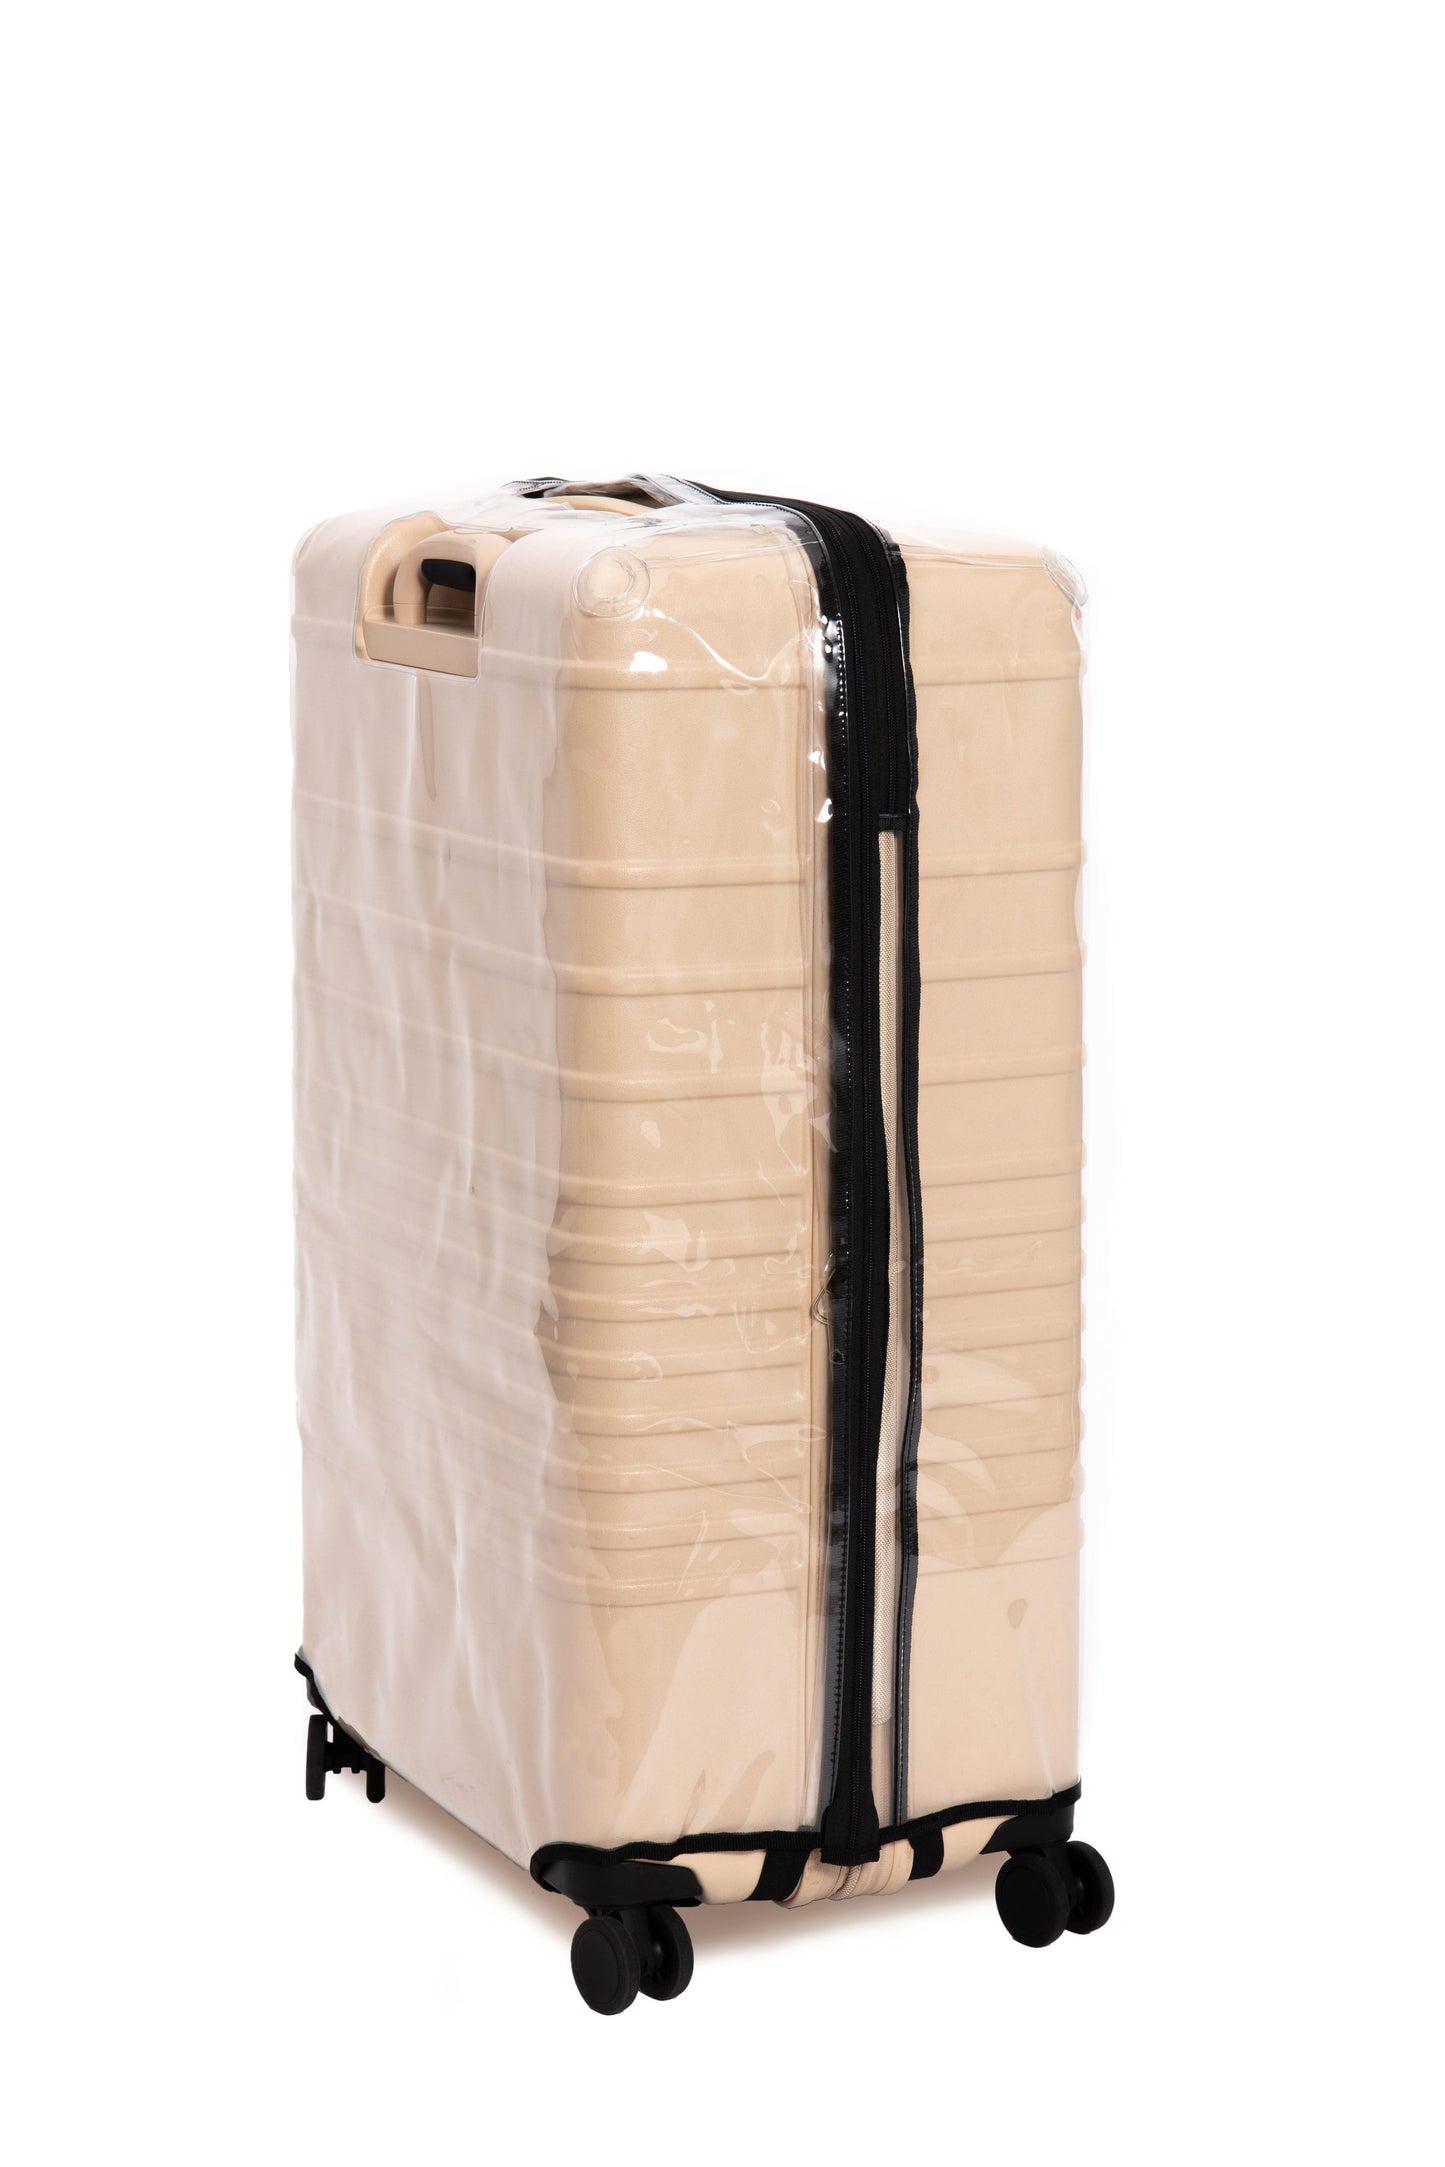 The Large Check-In Luggage Cover